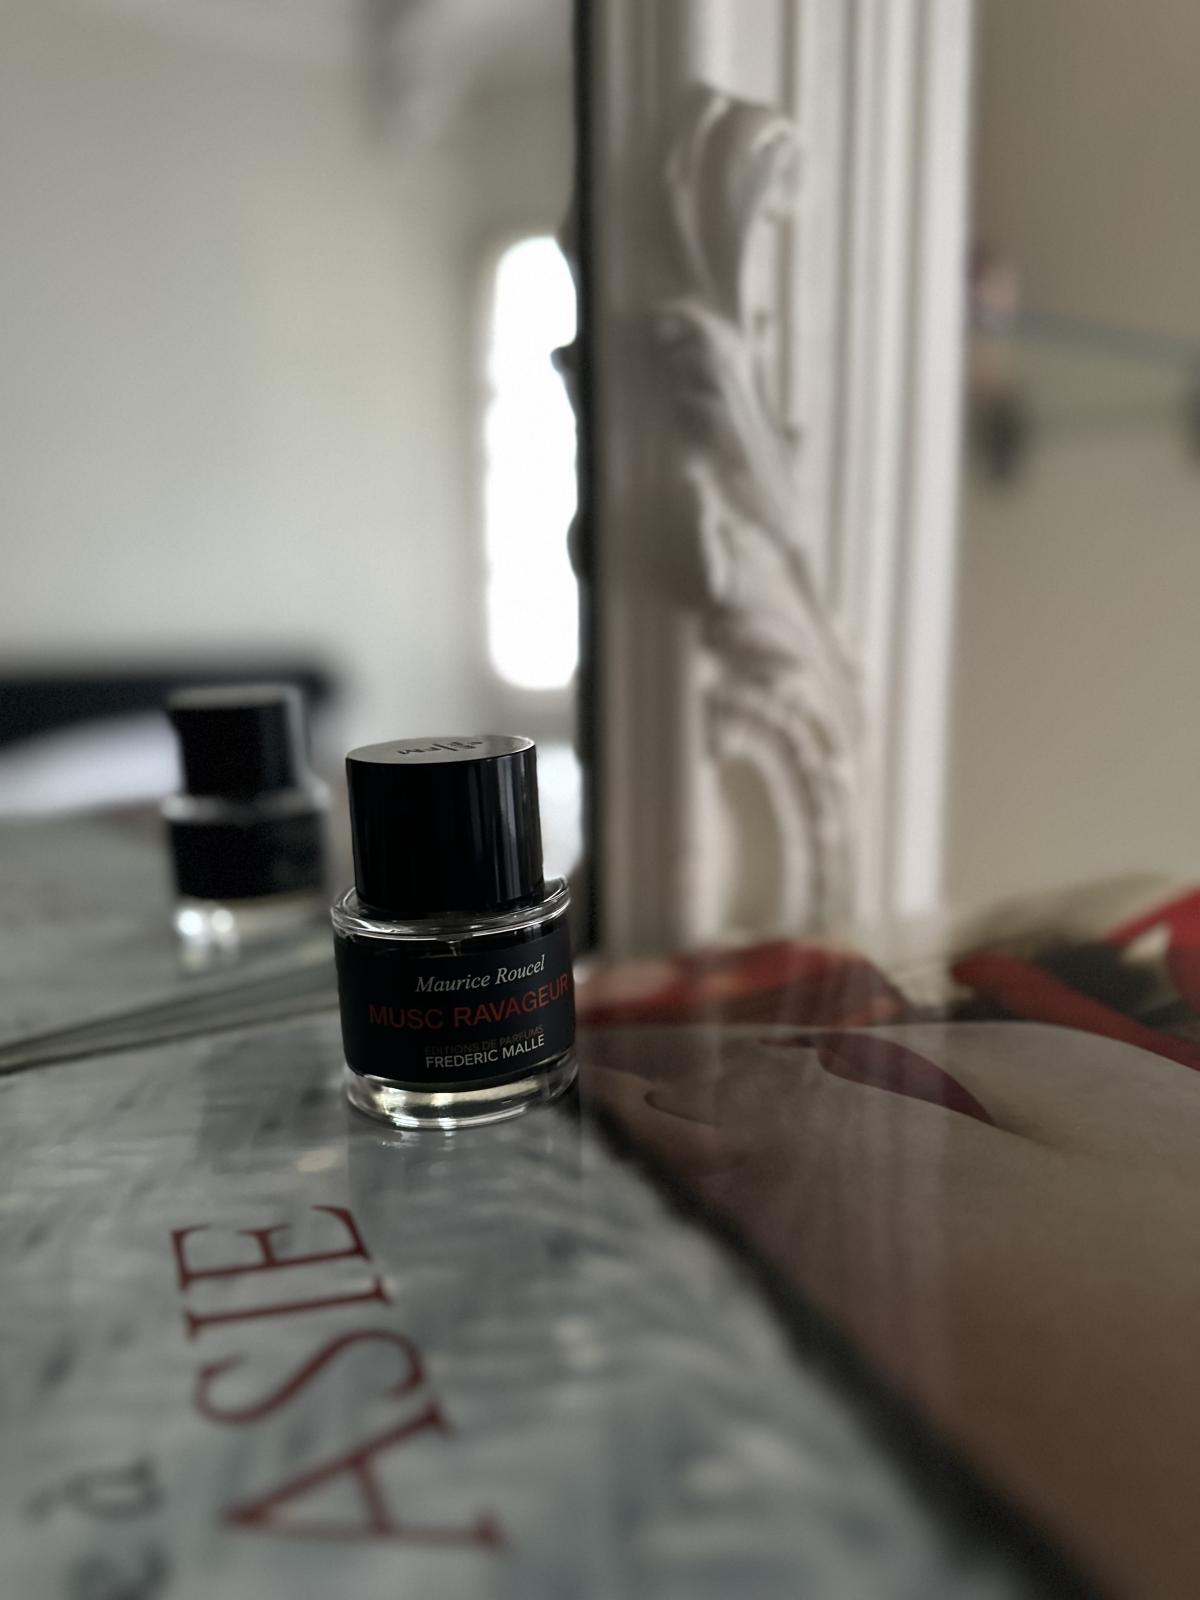 Musc Ravageur Frederic Malle perfume - a fragrance for women and men 2000